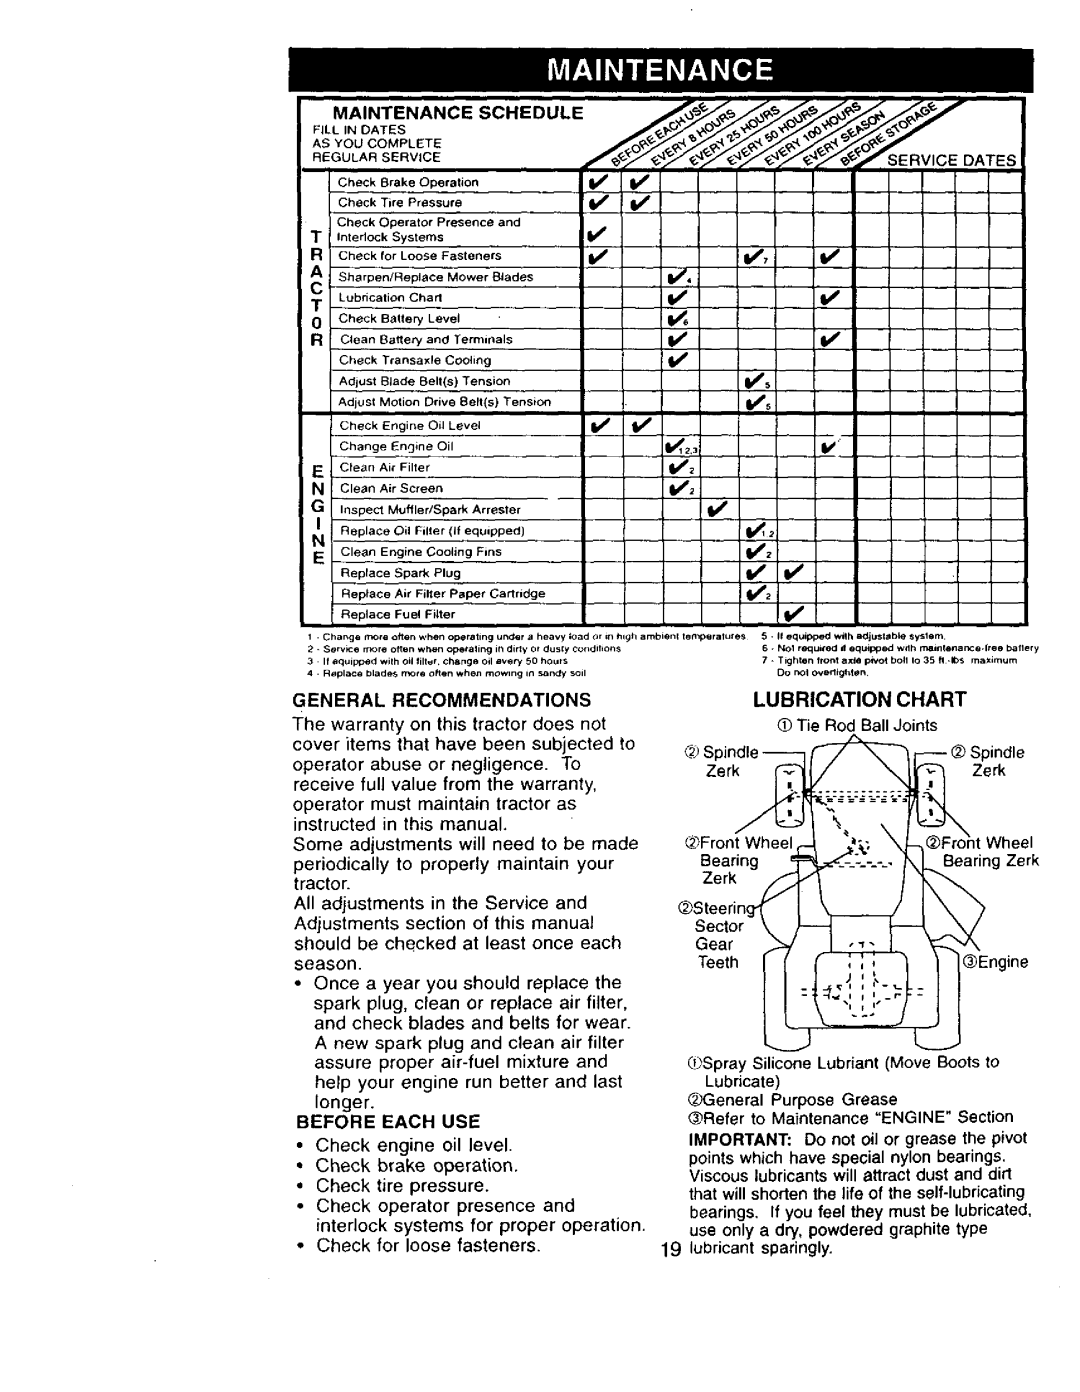 Craftsman 917.273322 owner manual Pill,. Dates, I/_11, Lubrication Chart 